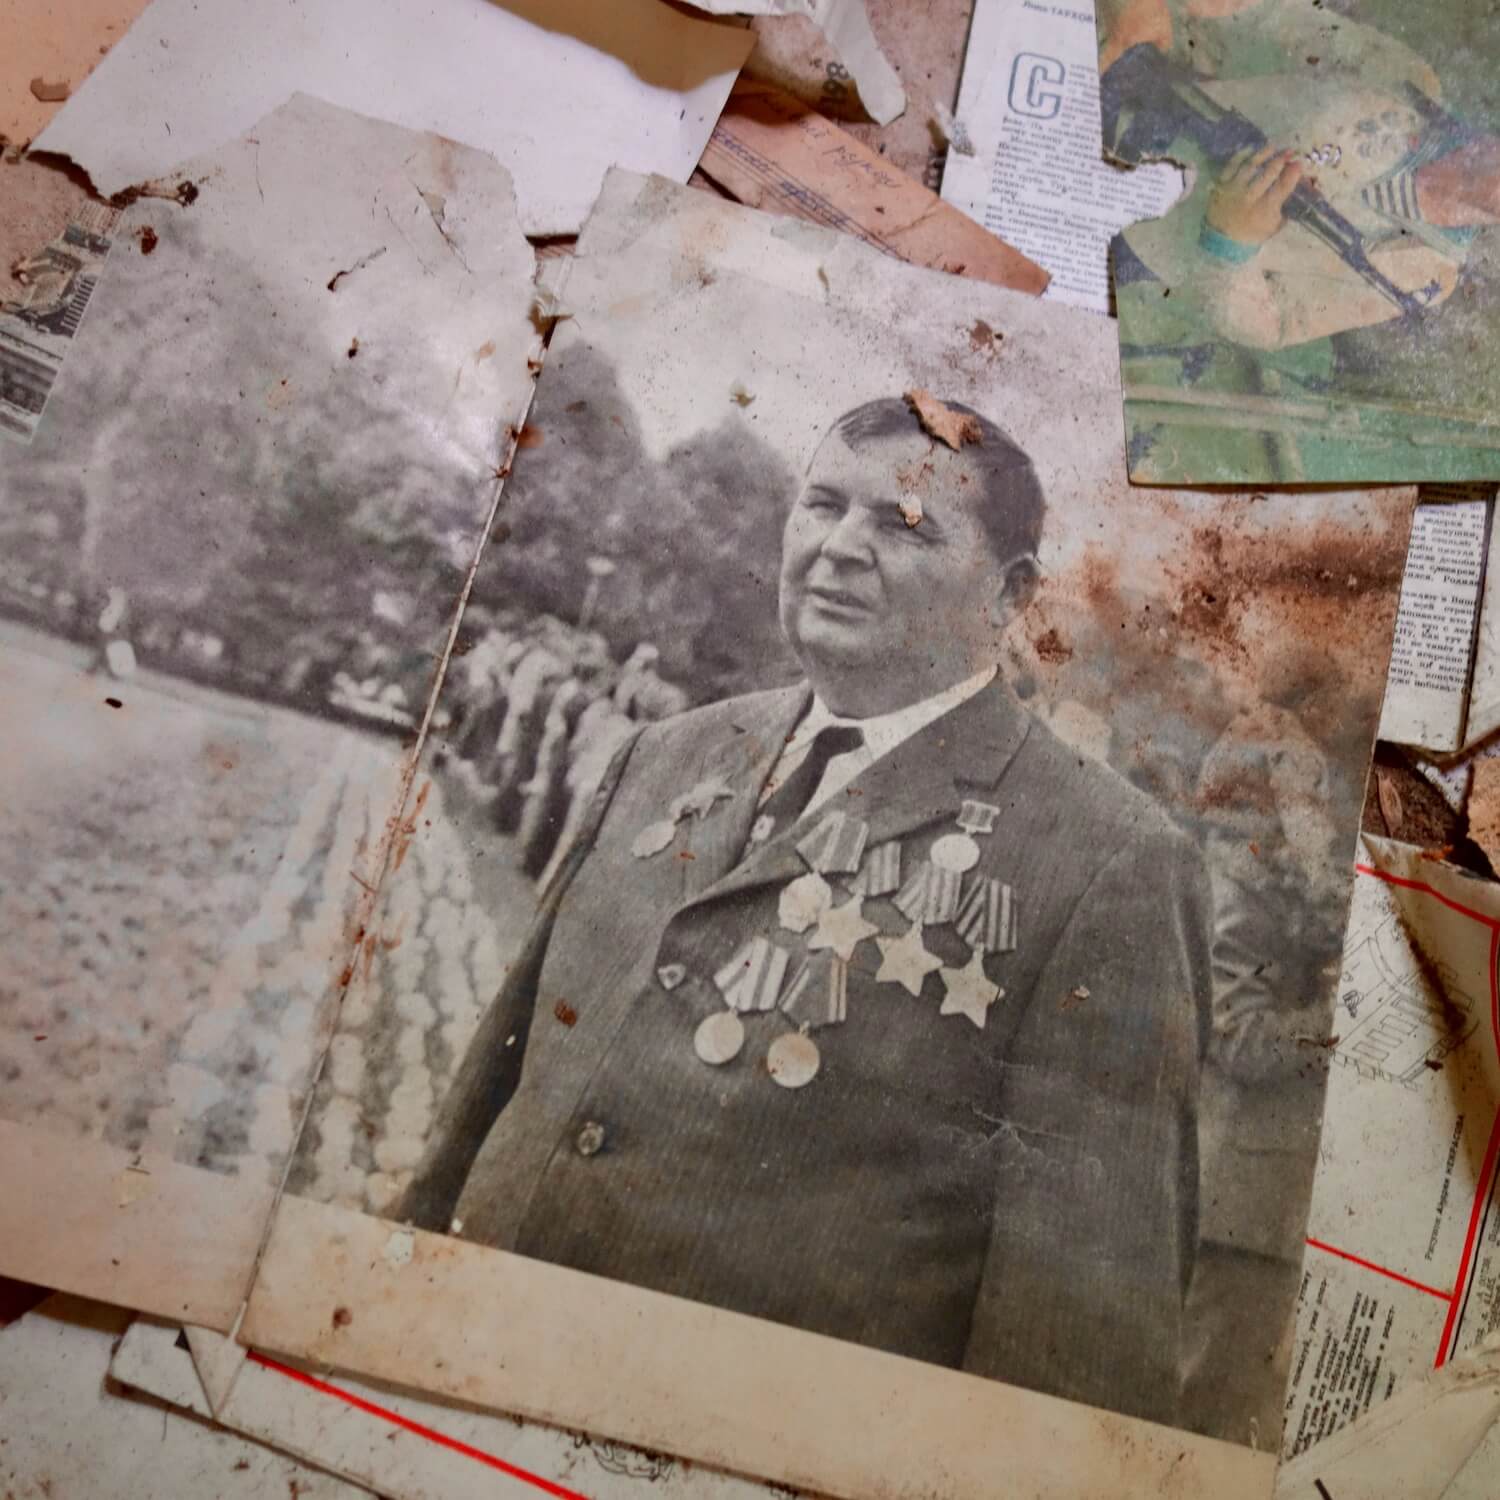 A magazine in Russian depicting a decorated general is part of many papers, periodicals and photos scattered on the floor in an abandoned concert hall in Prypyat, the closest city to Reactor #4.